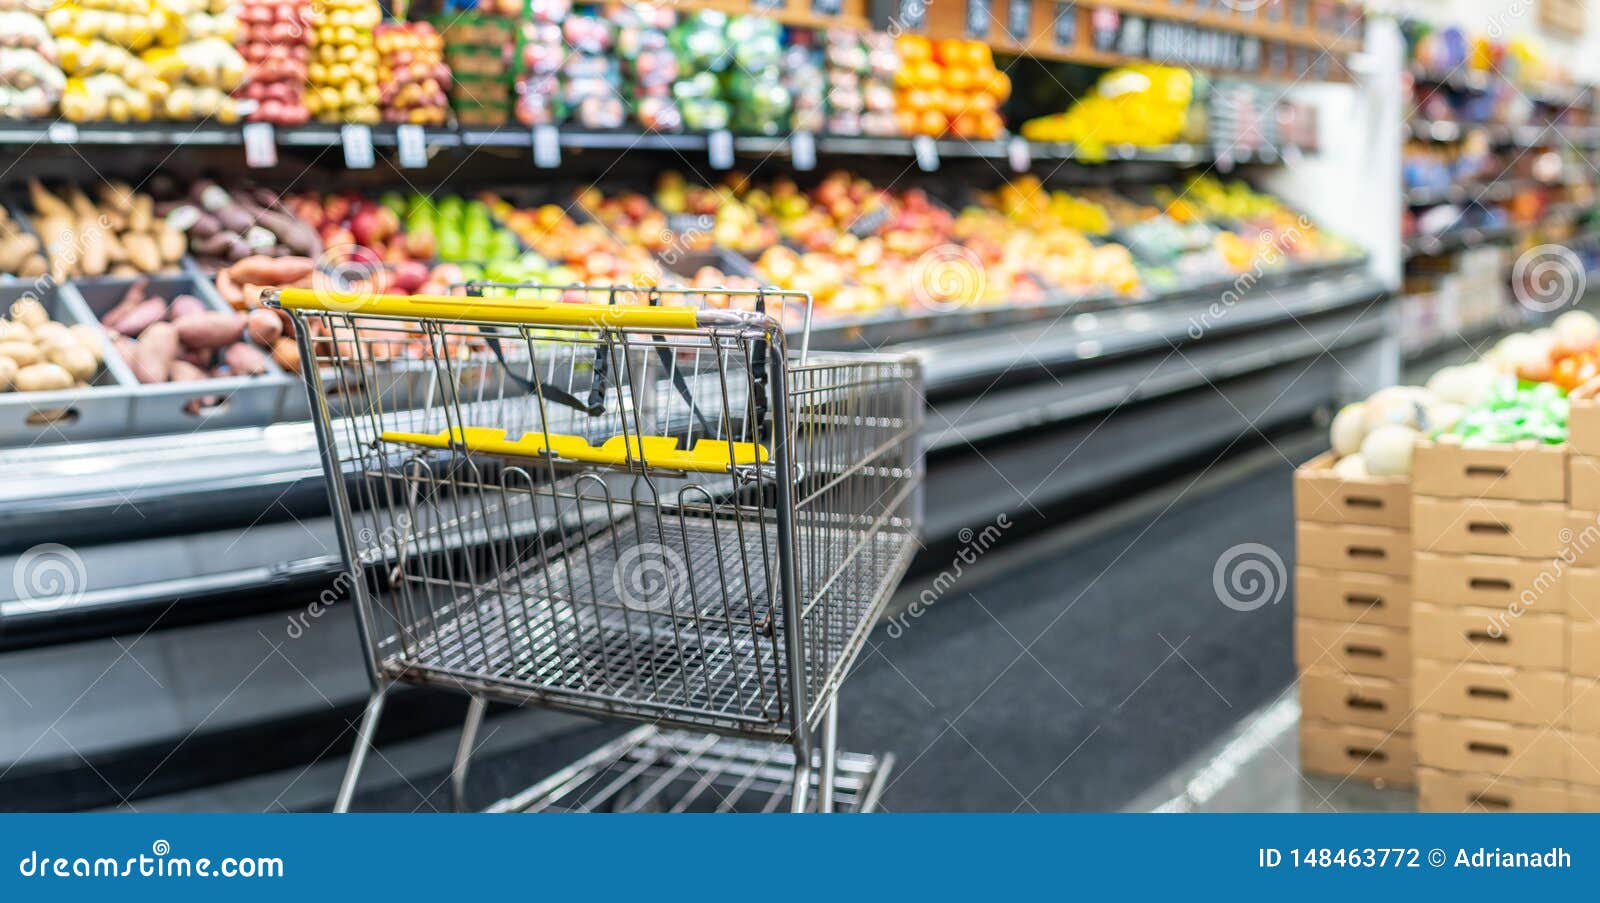 empty shopping cart at a supermarket produce and fruit  department